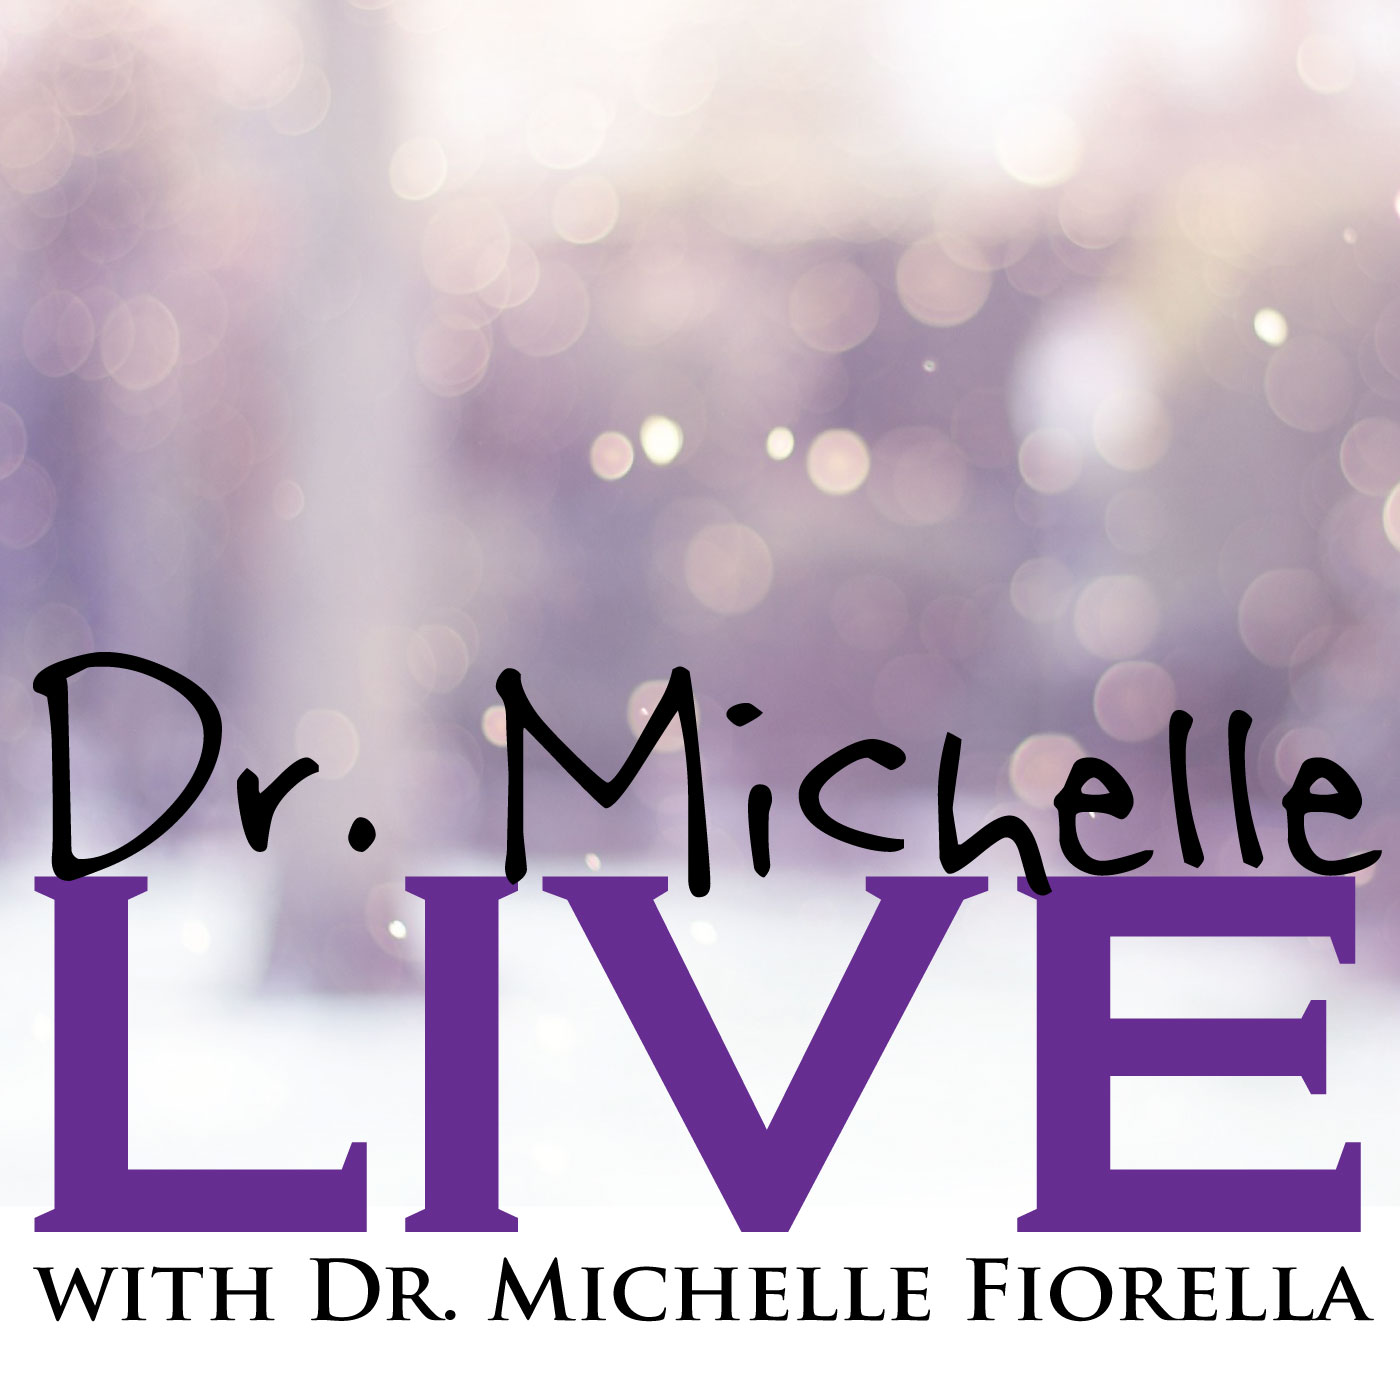 Dr. Michelle Live! 04/03/17 Loving Yourself Through Rejection. Triggers of Abandonment and Past Rejection vs. Fear of Abandonment and Rejection